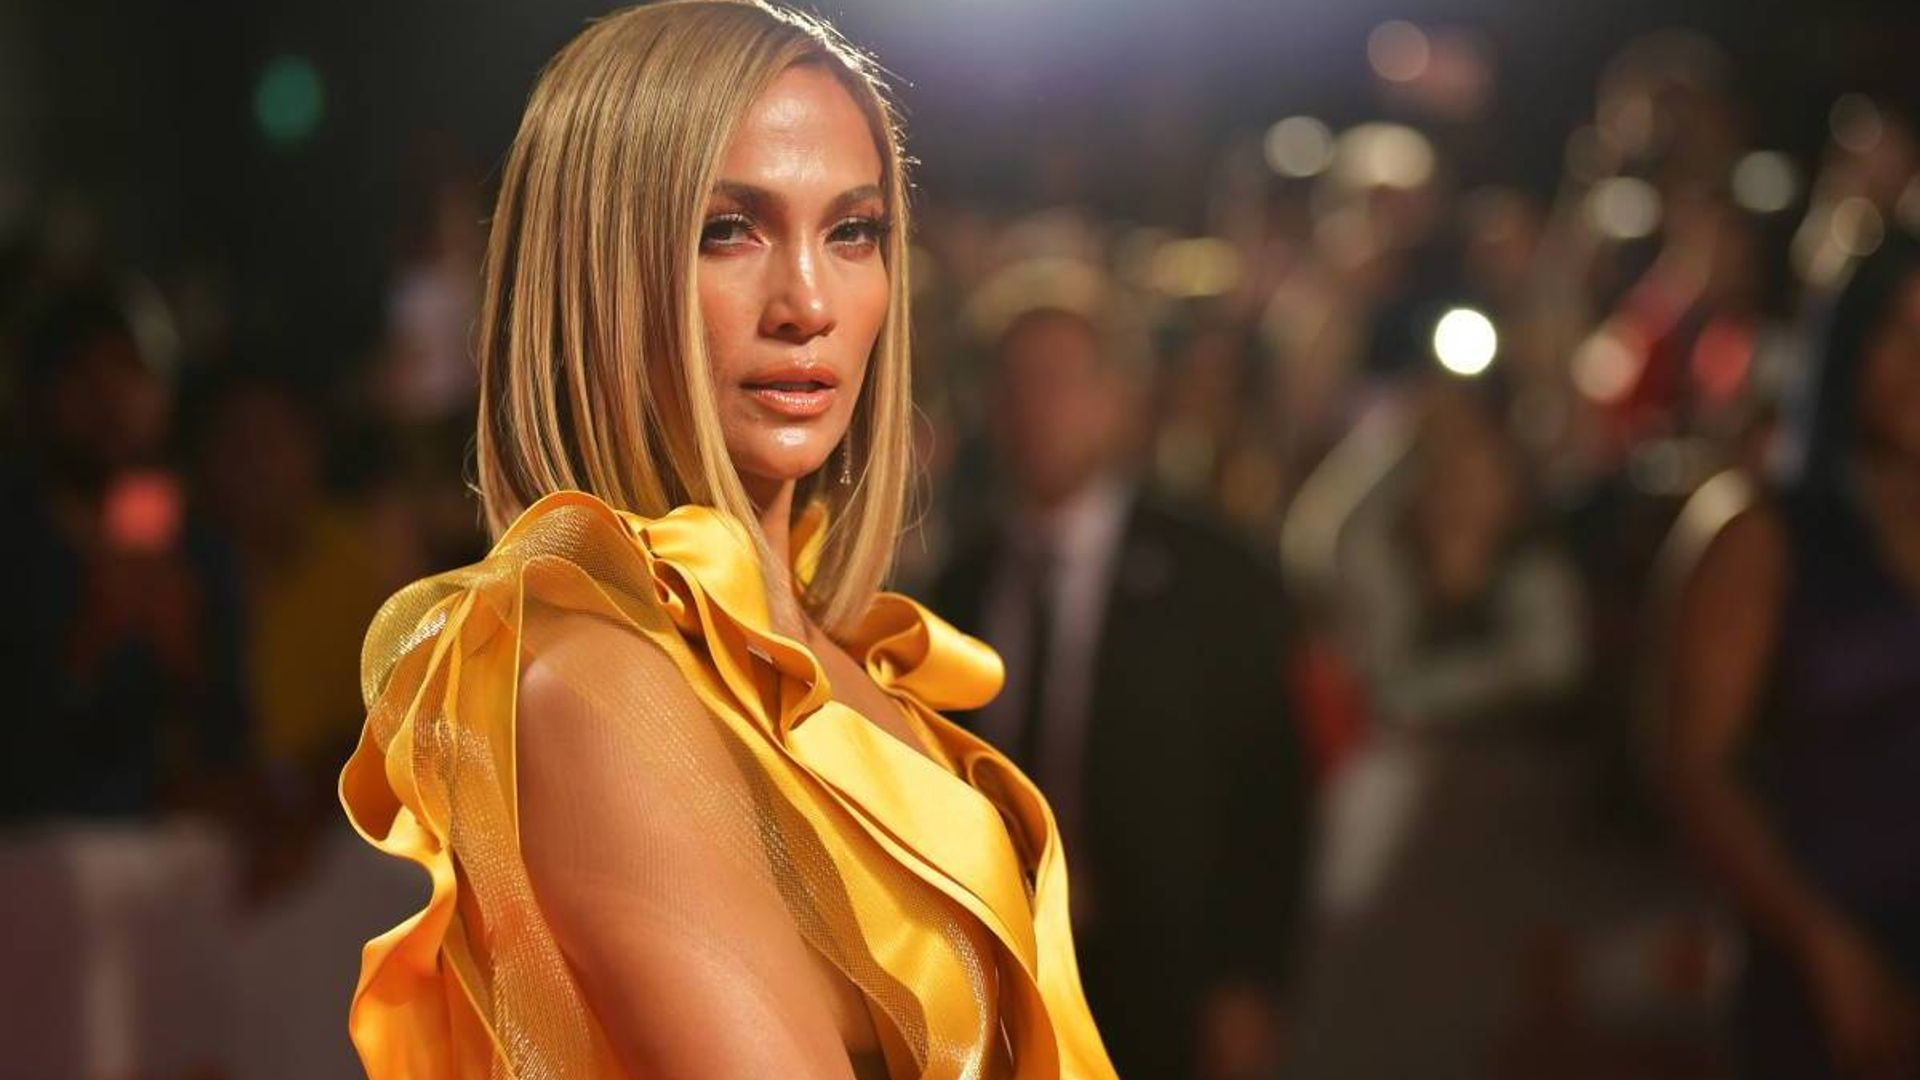 Jennifer Lopez sizzles in a neon cutout dress that will blow your mind